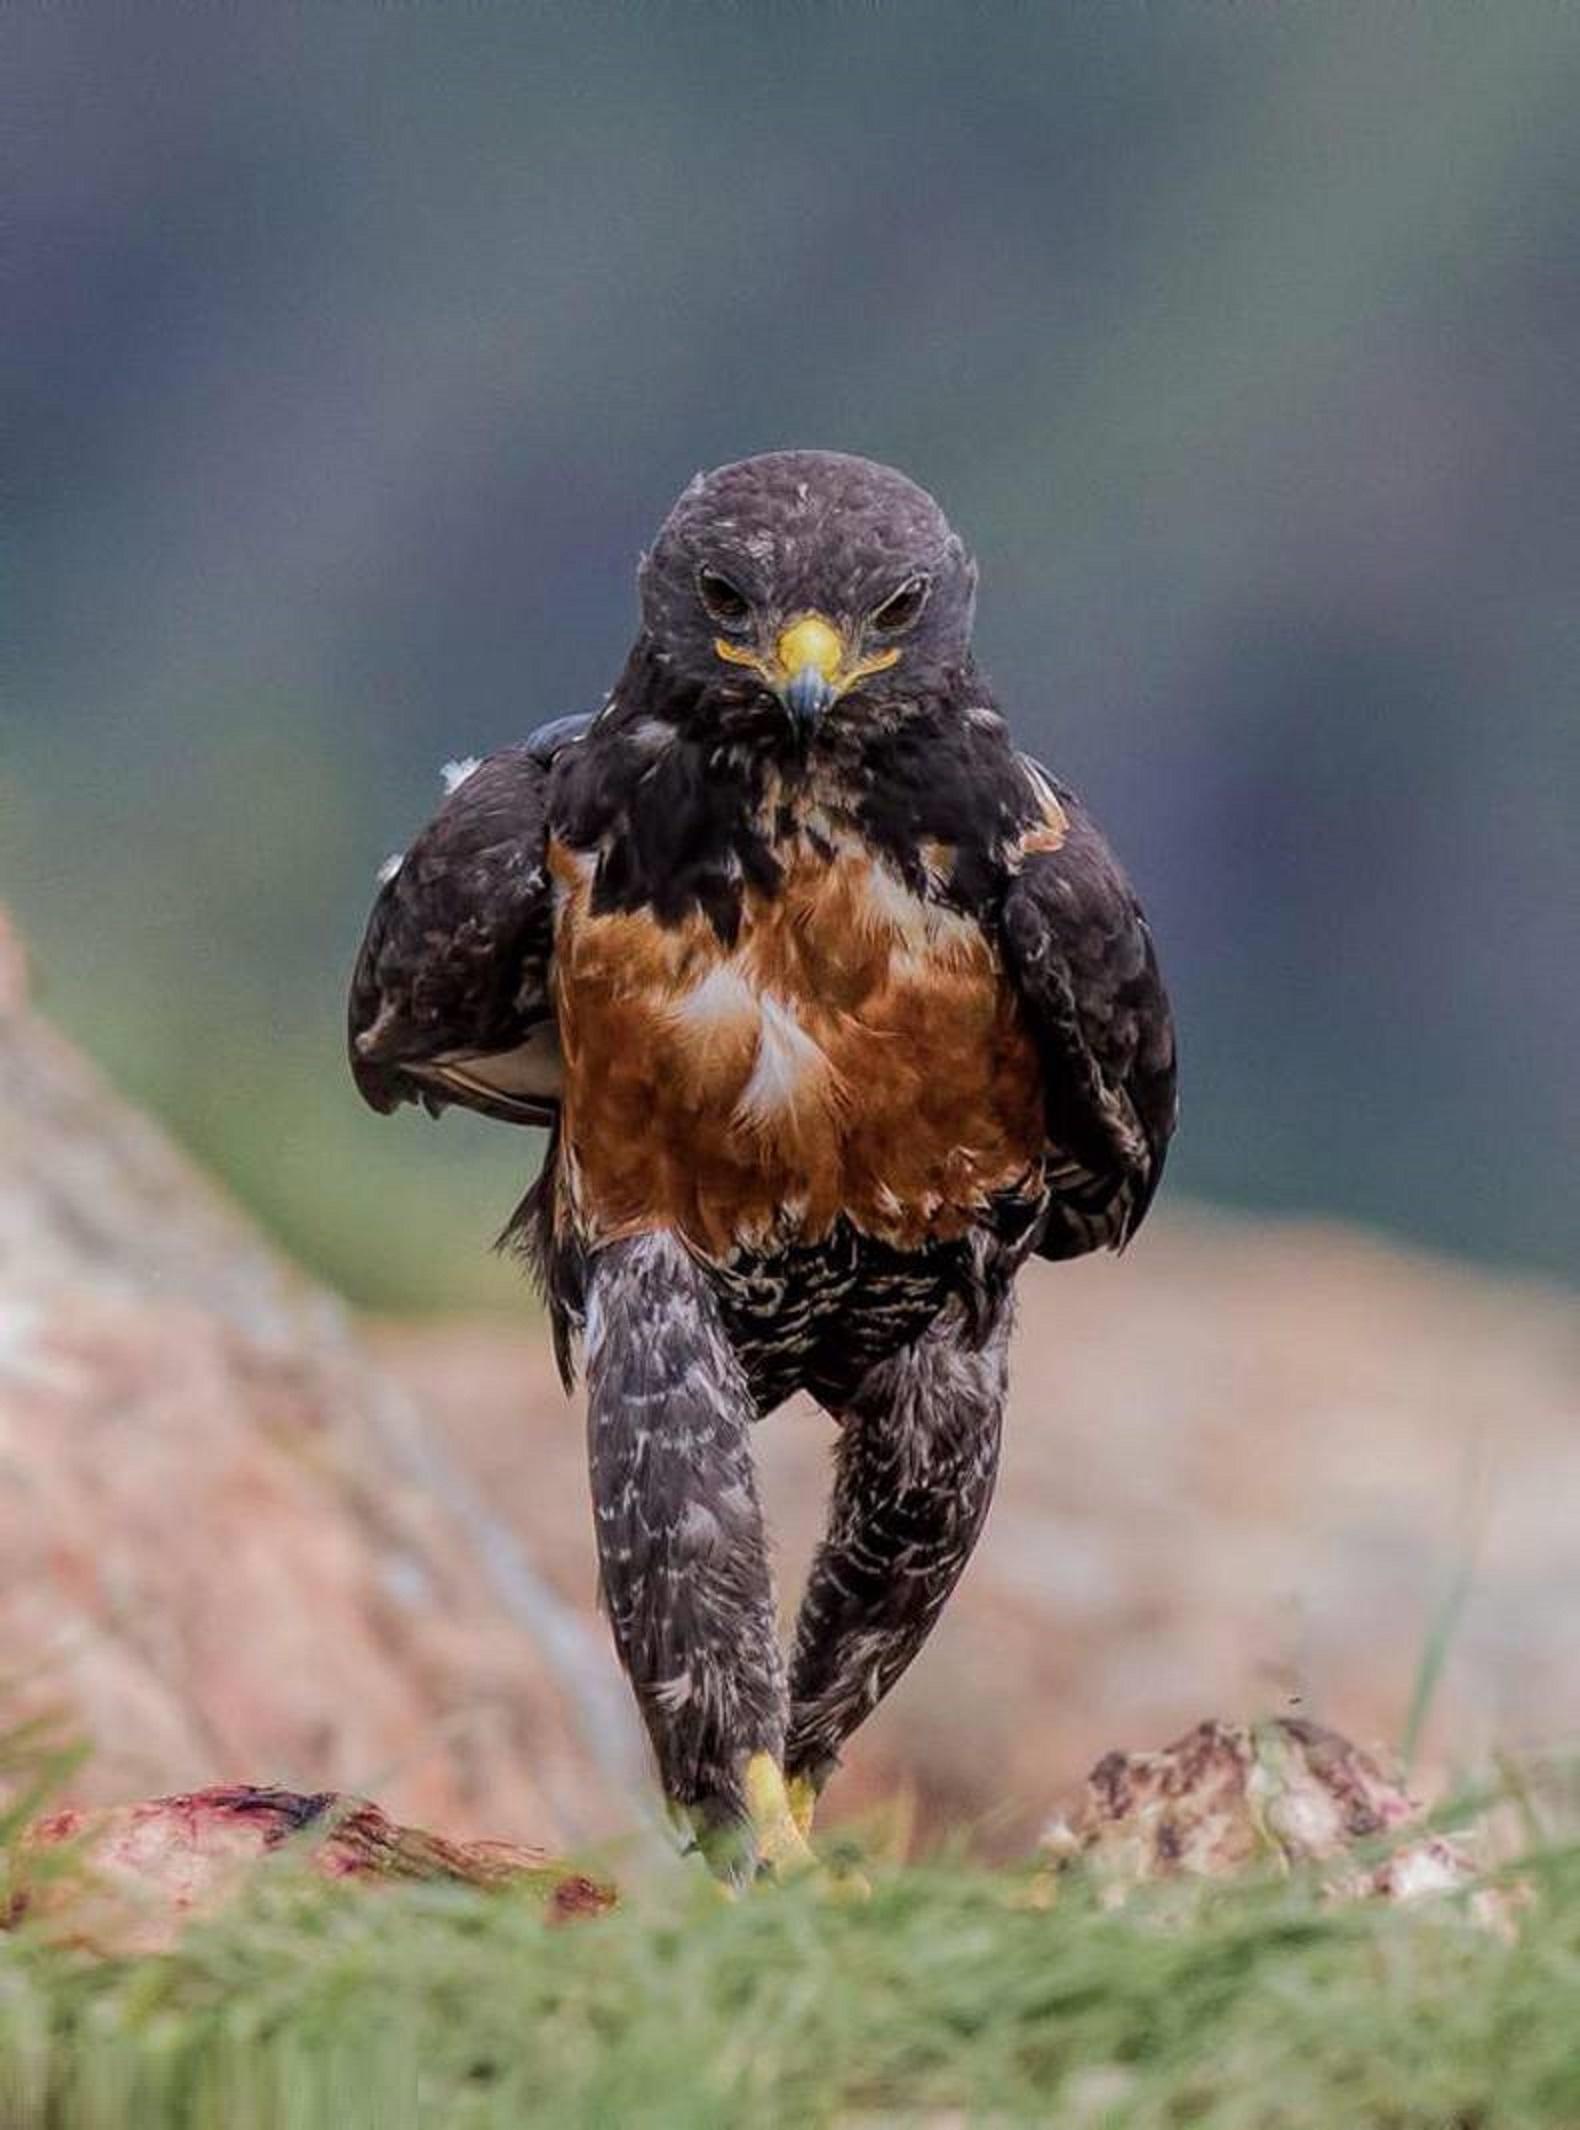 This is how a walking Harris's Hawk looks like when seen from front.